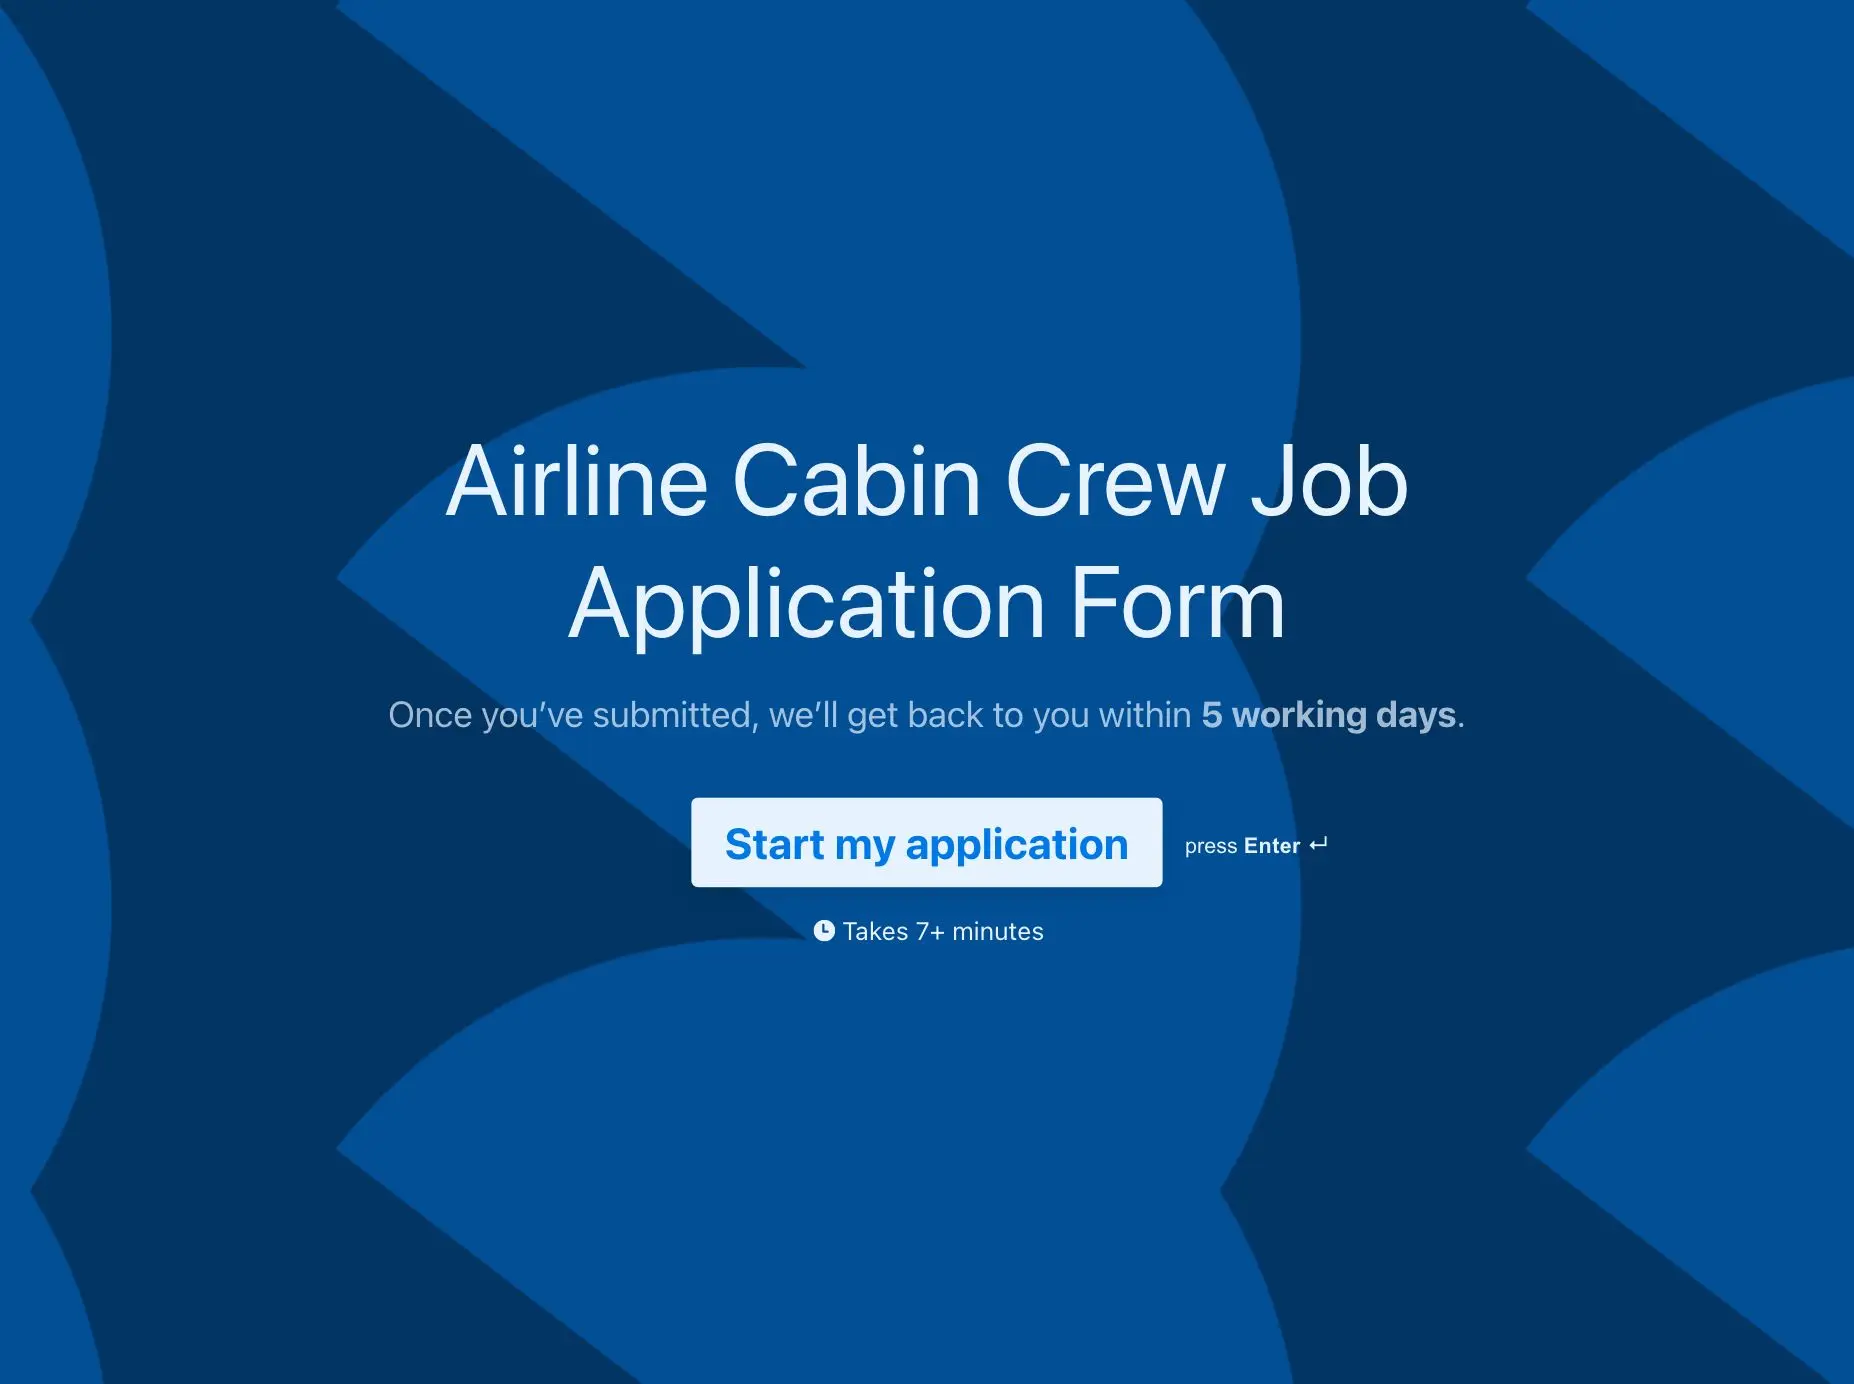 Airline Cabin Crew Job Application Form Template Hero